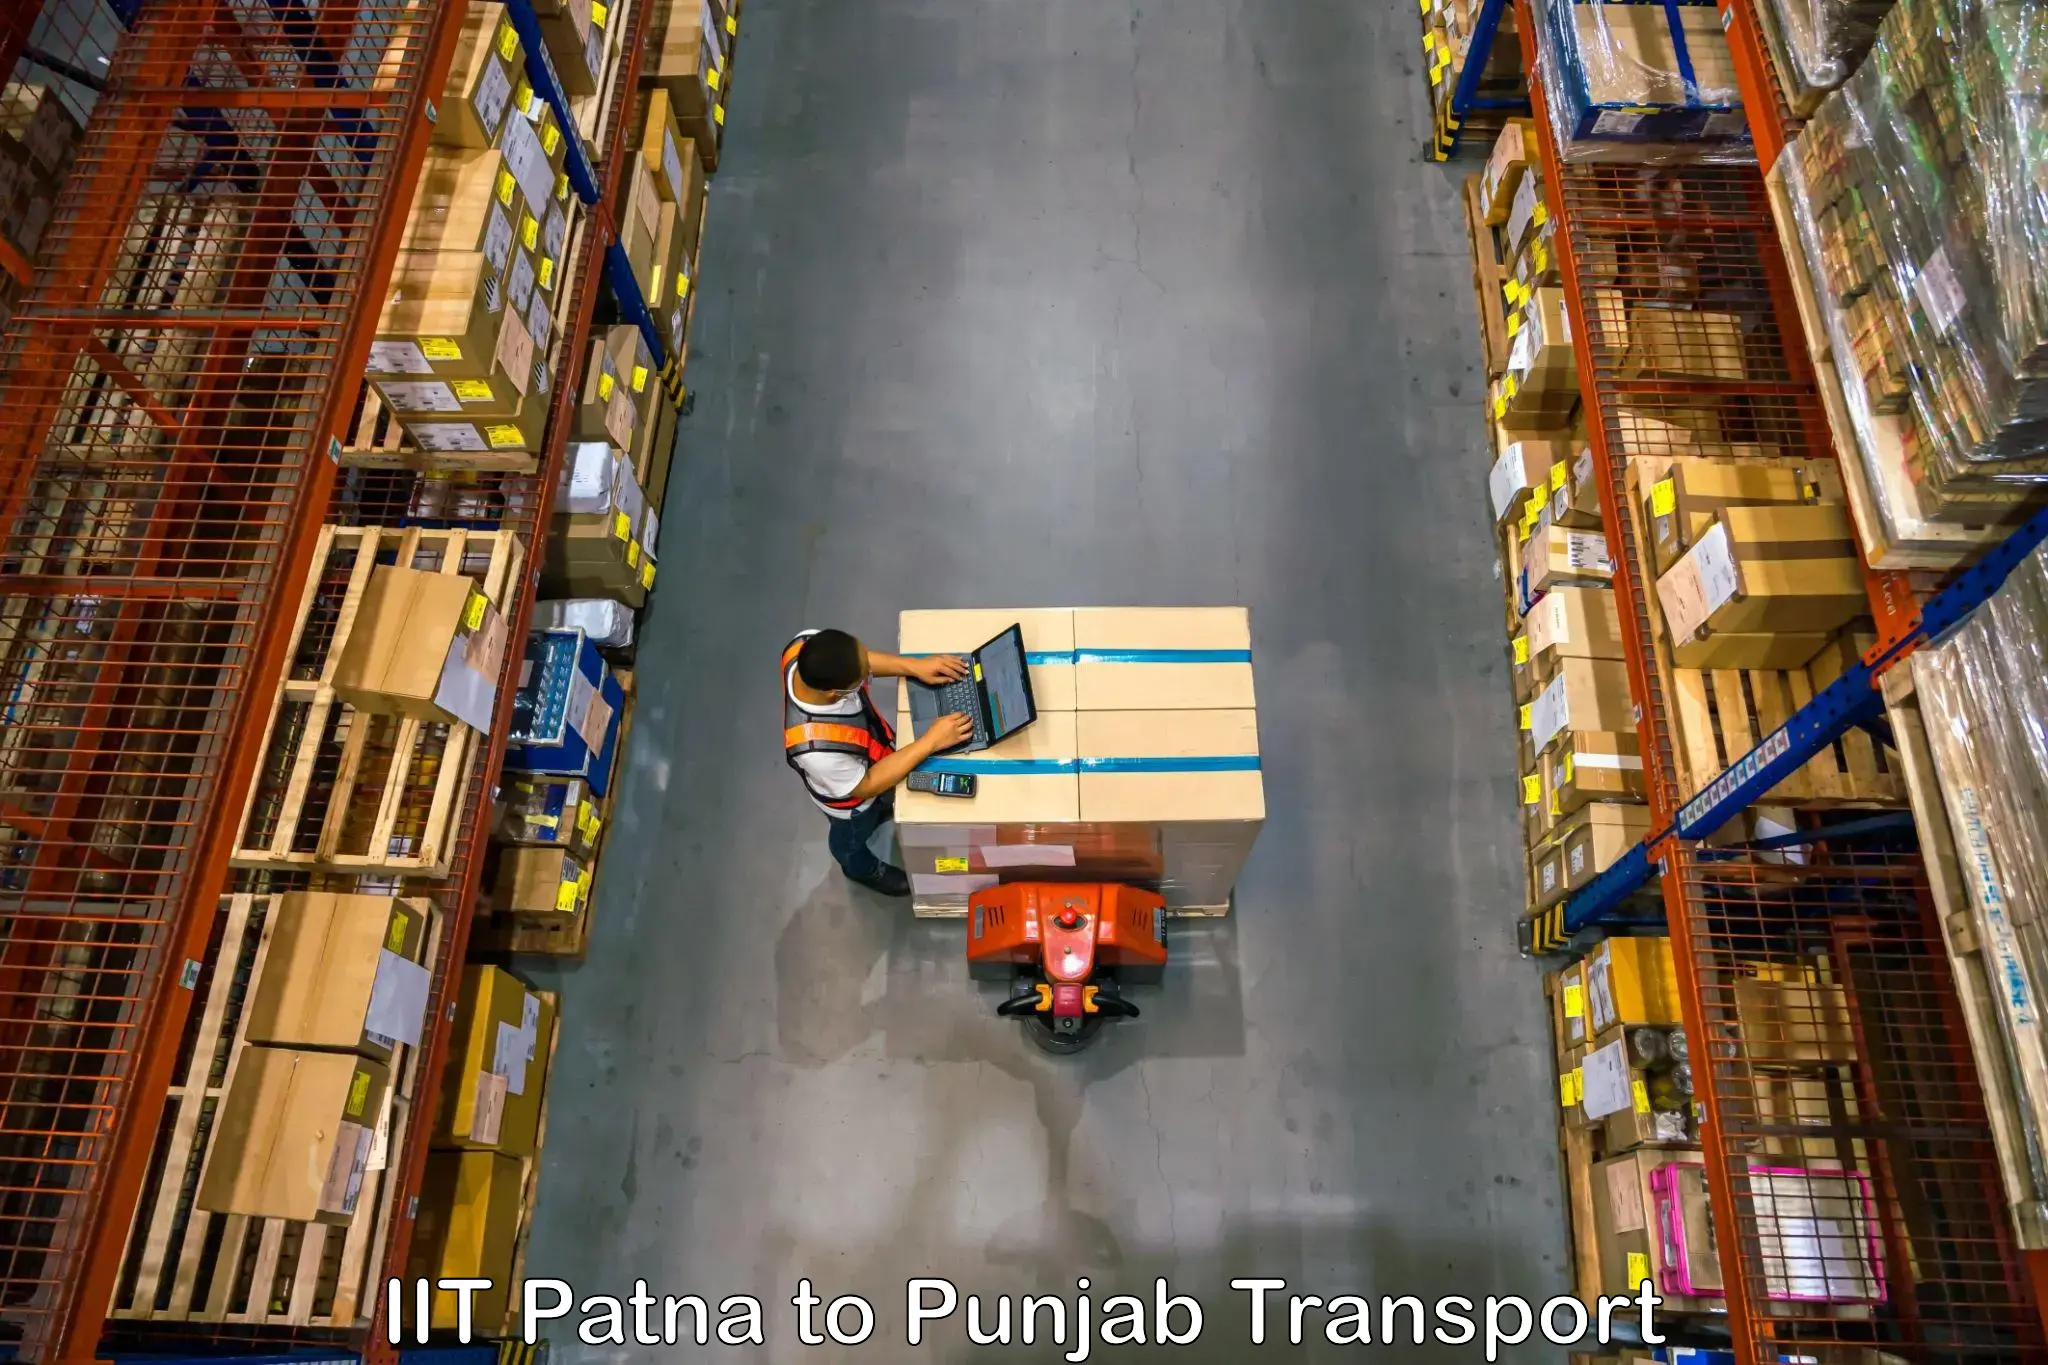 Part load transport service in India IIT Patna to Khanna